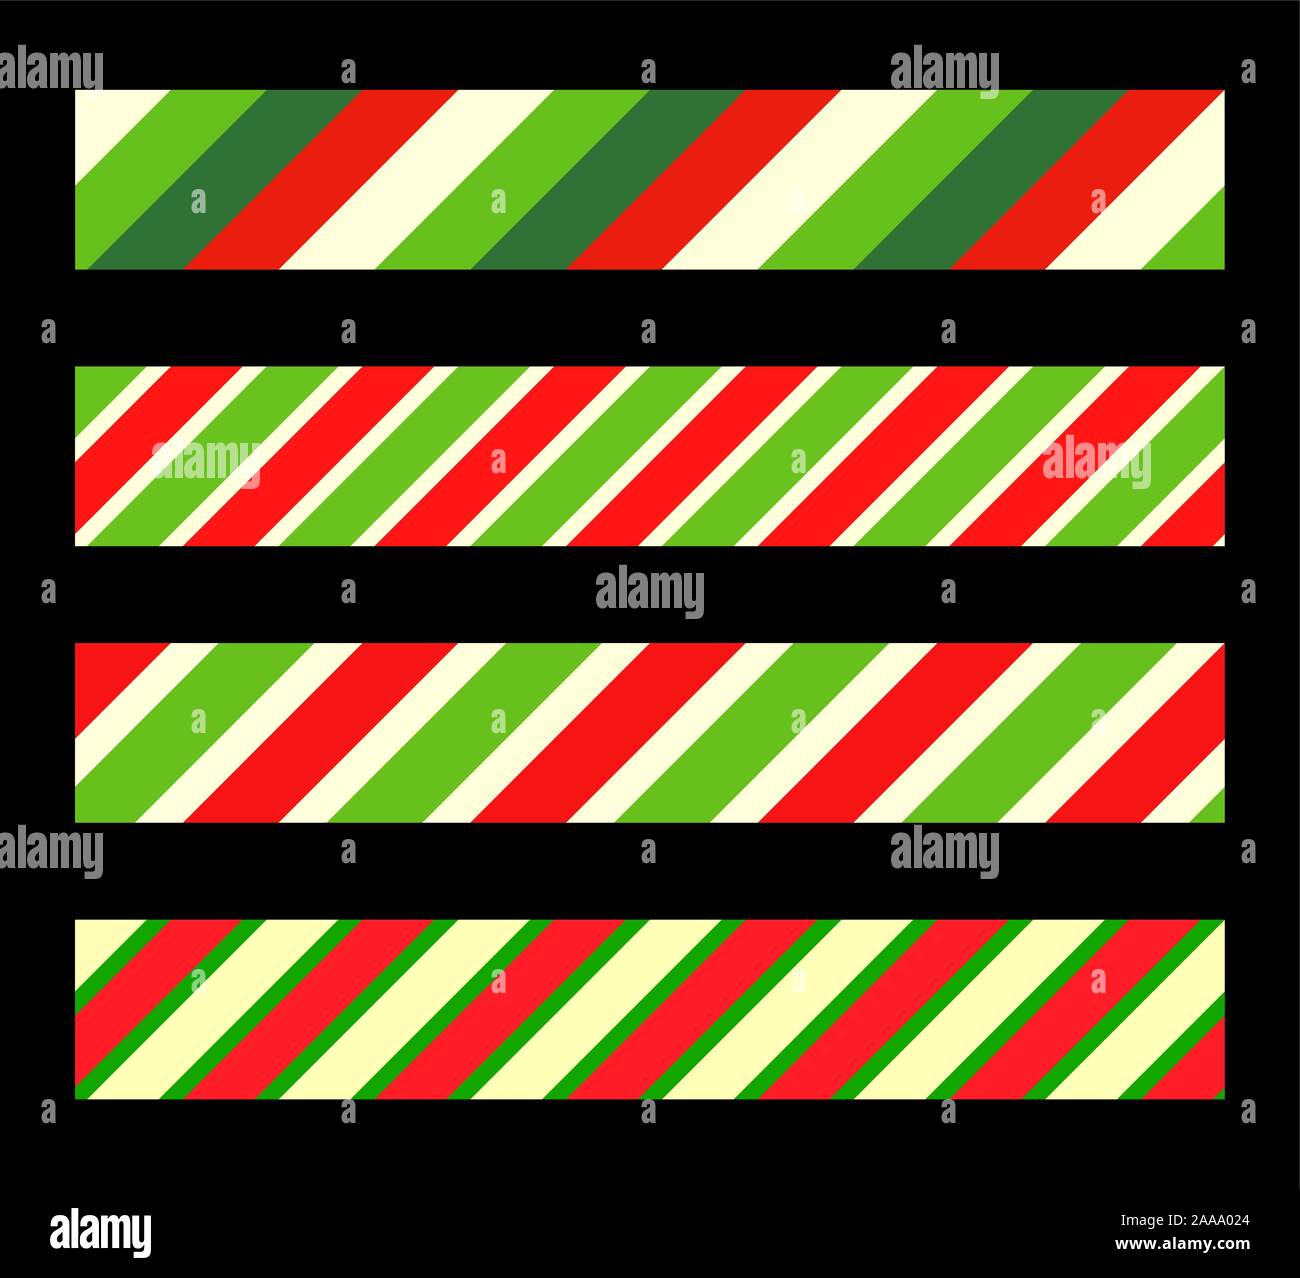 Candy cane line border divider for christmas design. diagonal green red stripes Seamless pattern Stock Vector